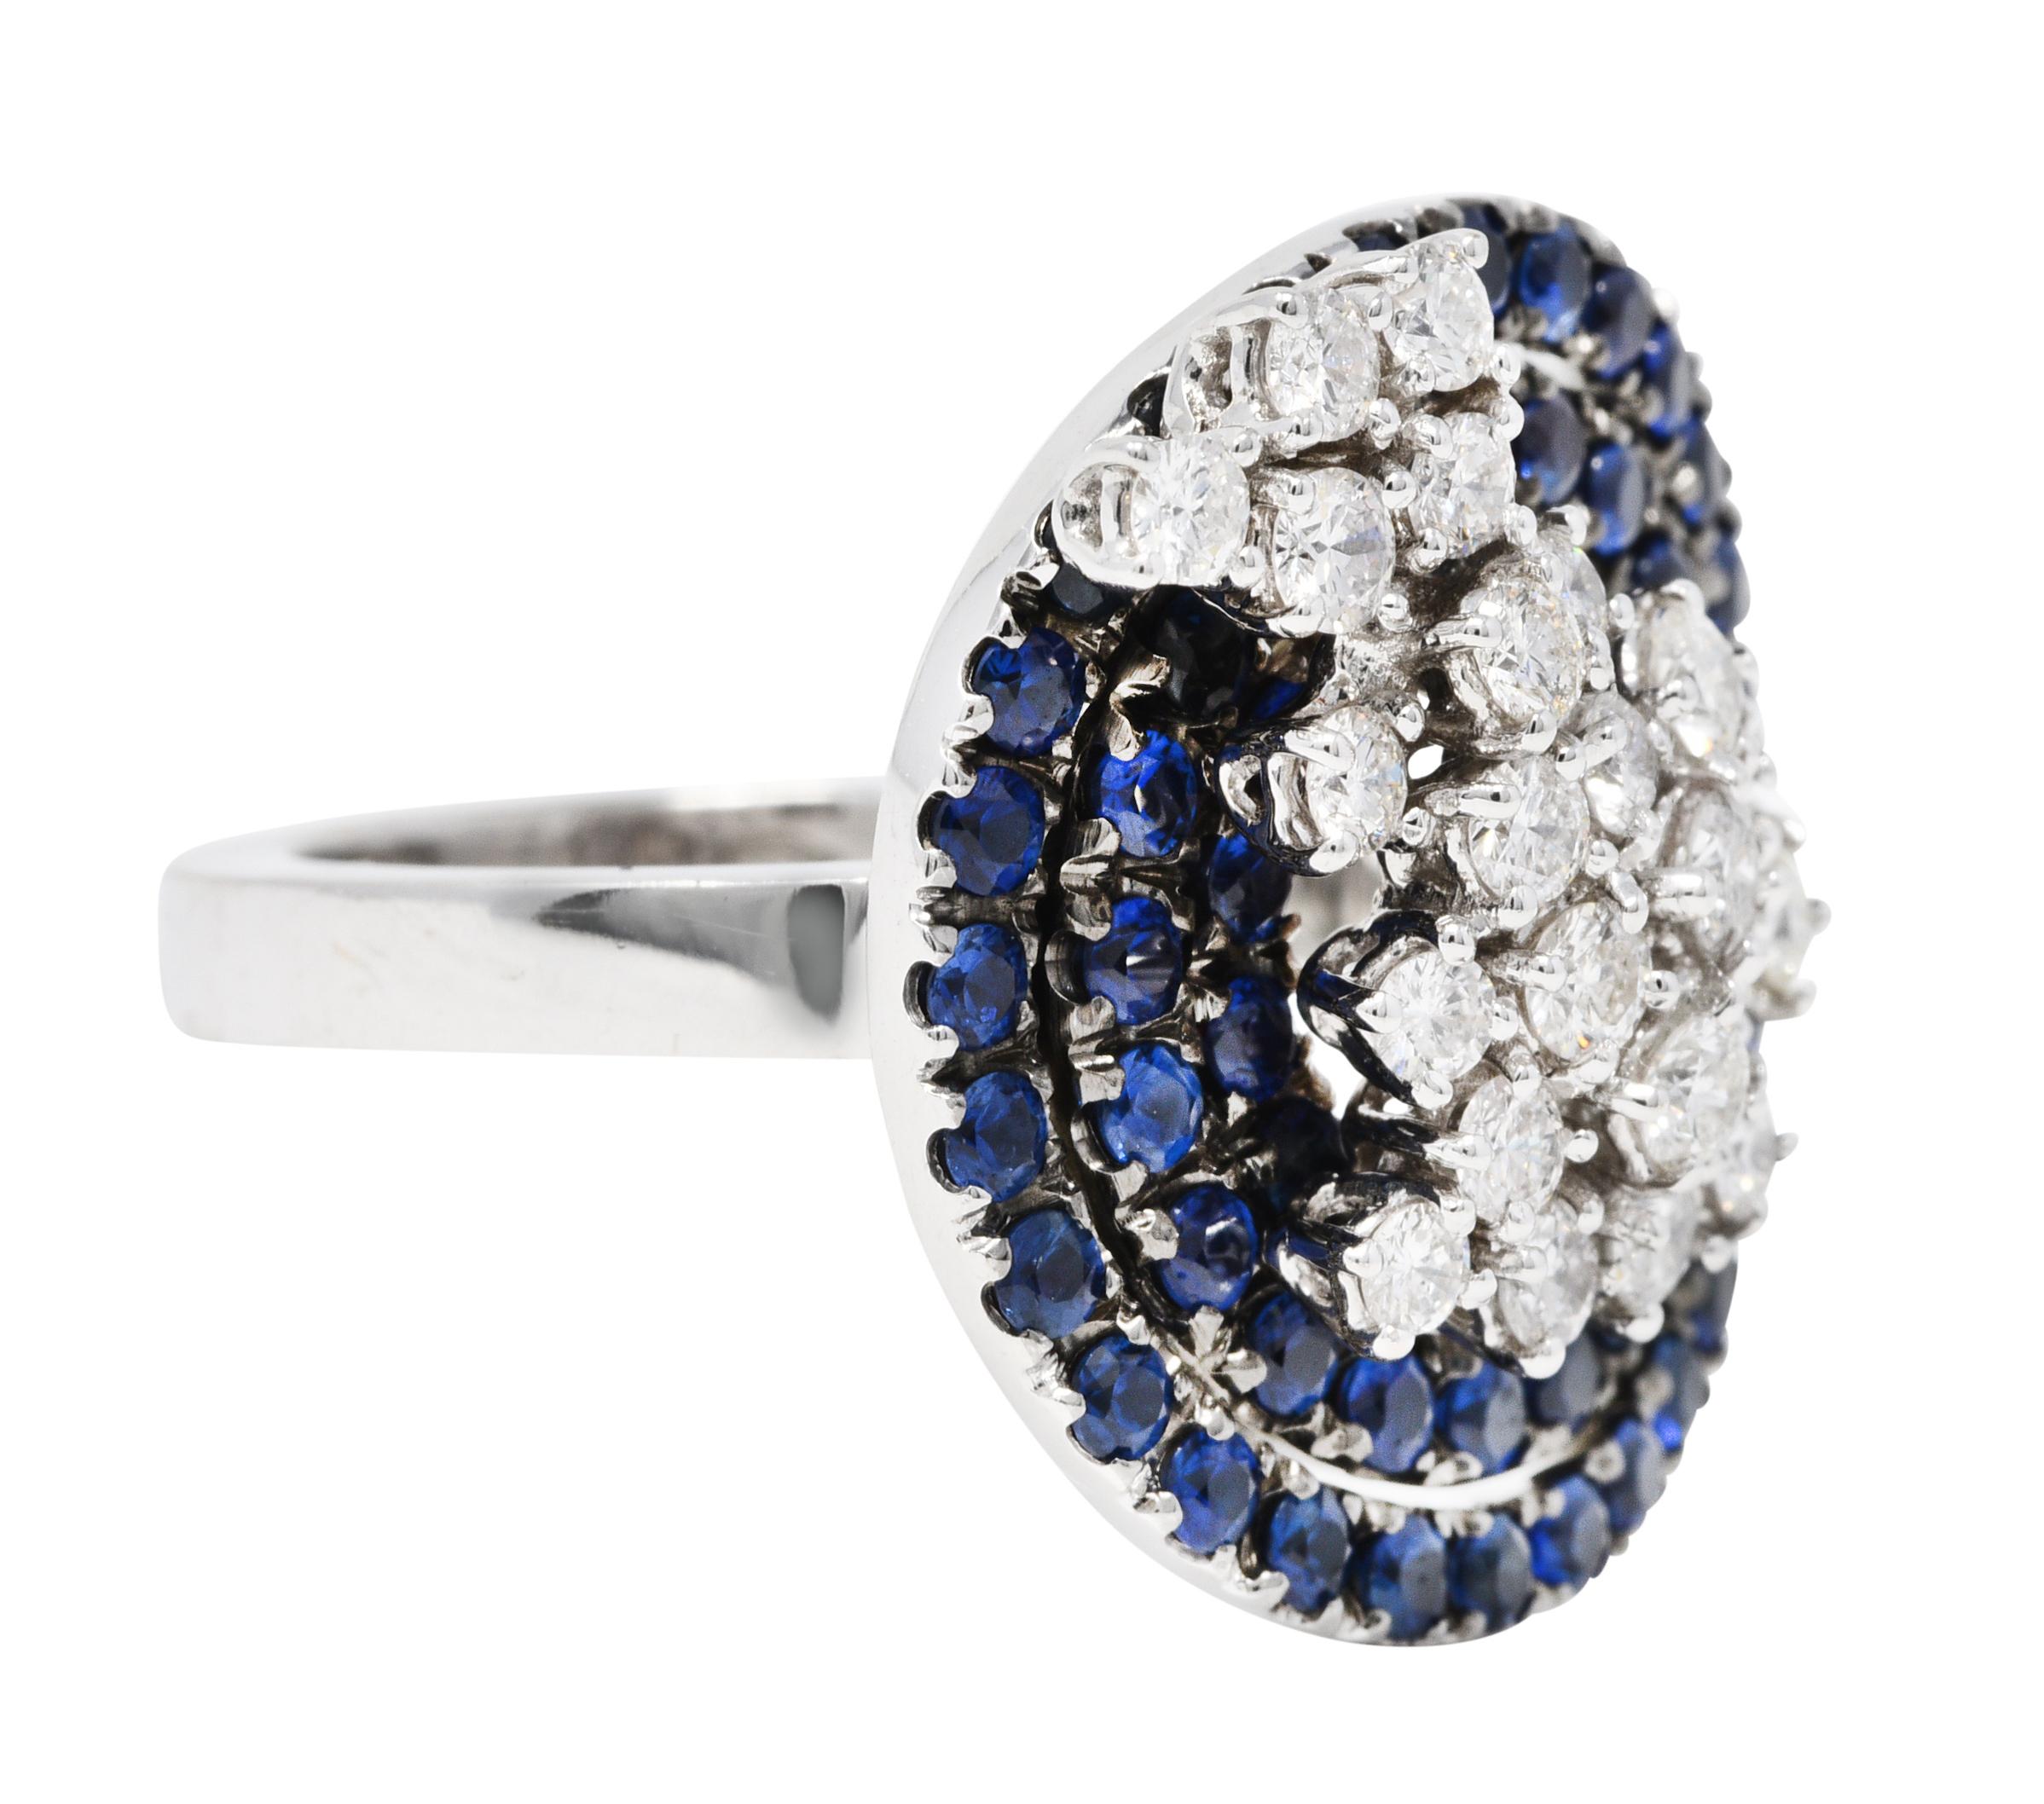 Designed as concentric circles of prong set sapphires with a black rhodium finish

Very well matched with vibrant royal blue color while weighing approximately 2.10 carats total

Centering a dynamic cluster of round brilliant cut diamonds

Weighing